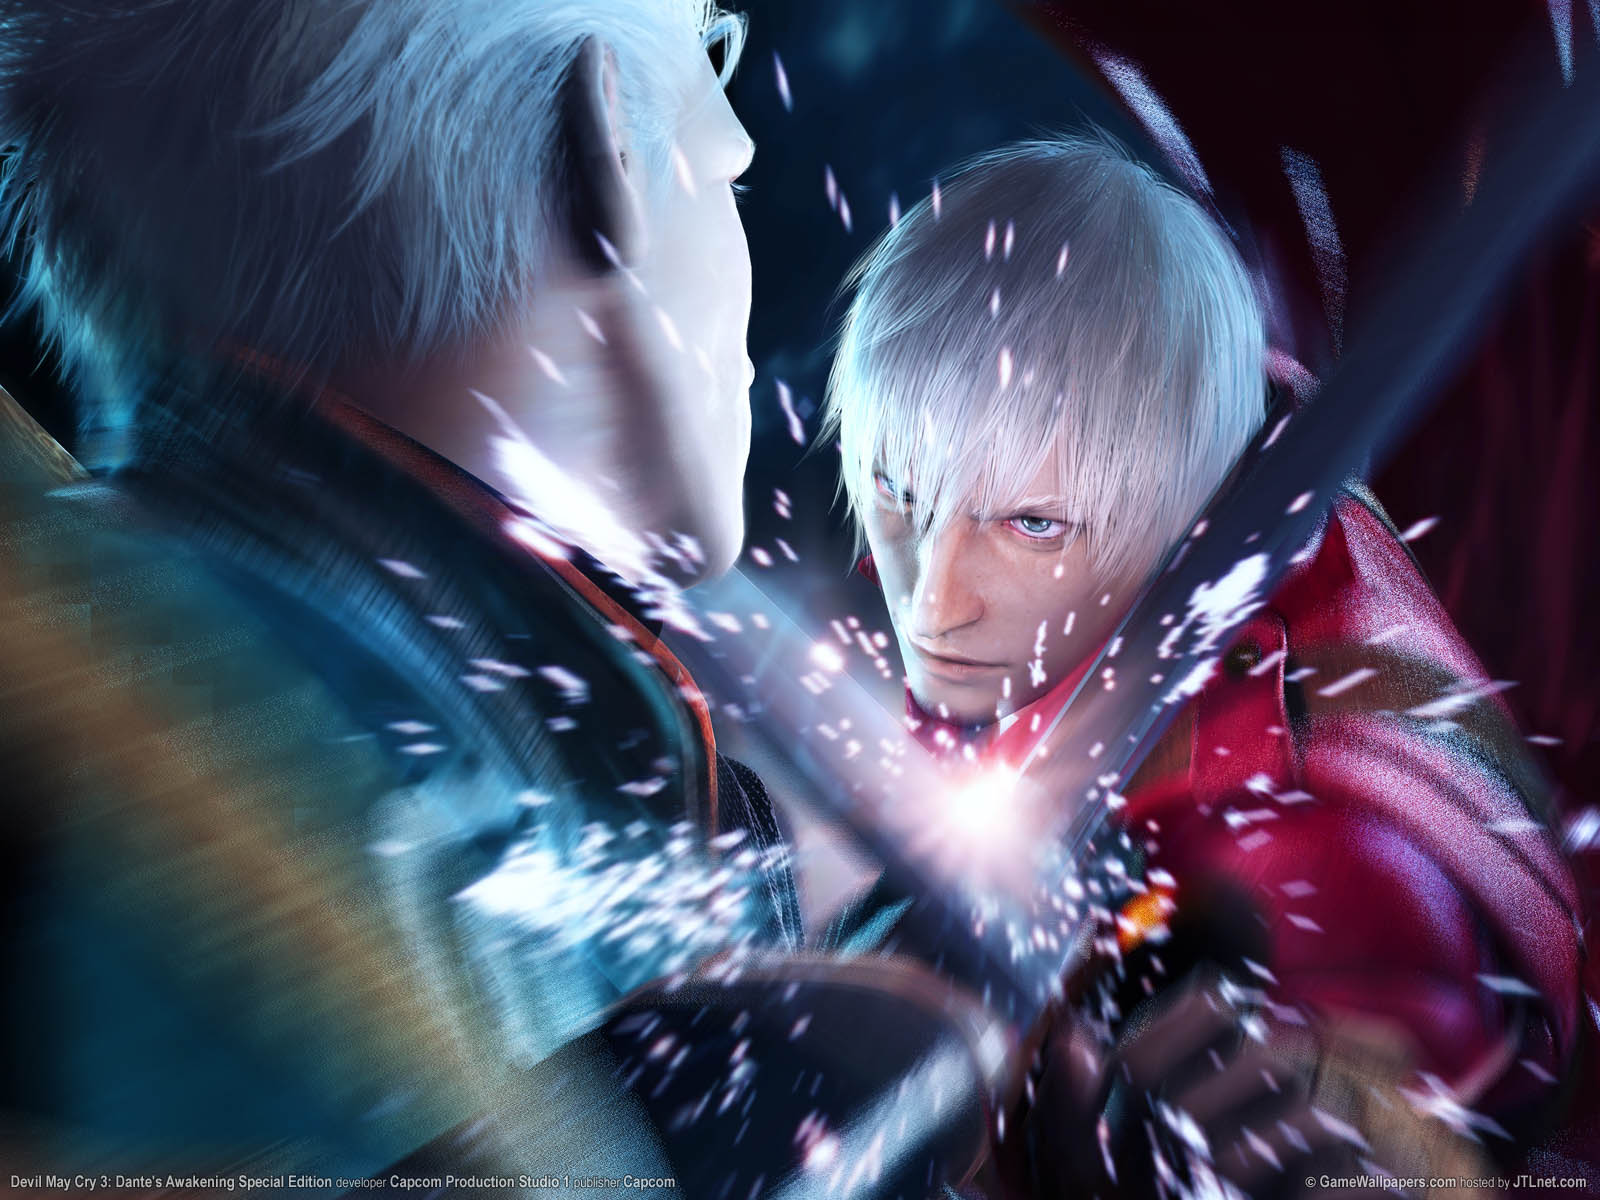 Vergil and Dante from Devil May Cry.